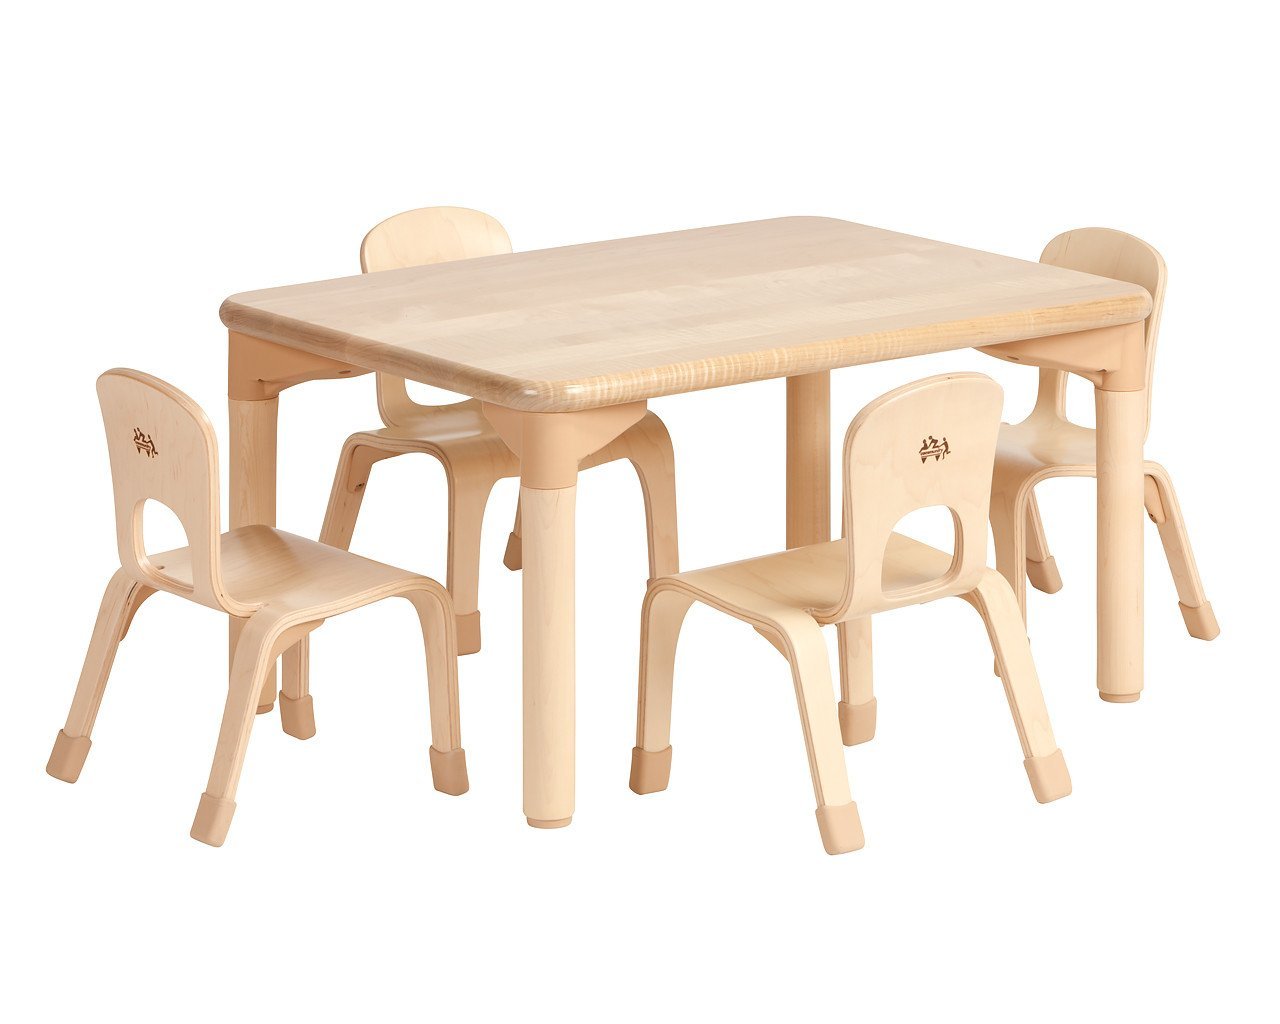 Community Playthings Rectangular Woodcrest Table 16" and Four Chairs 8" - louisekool